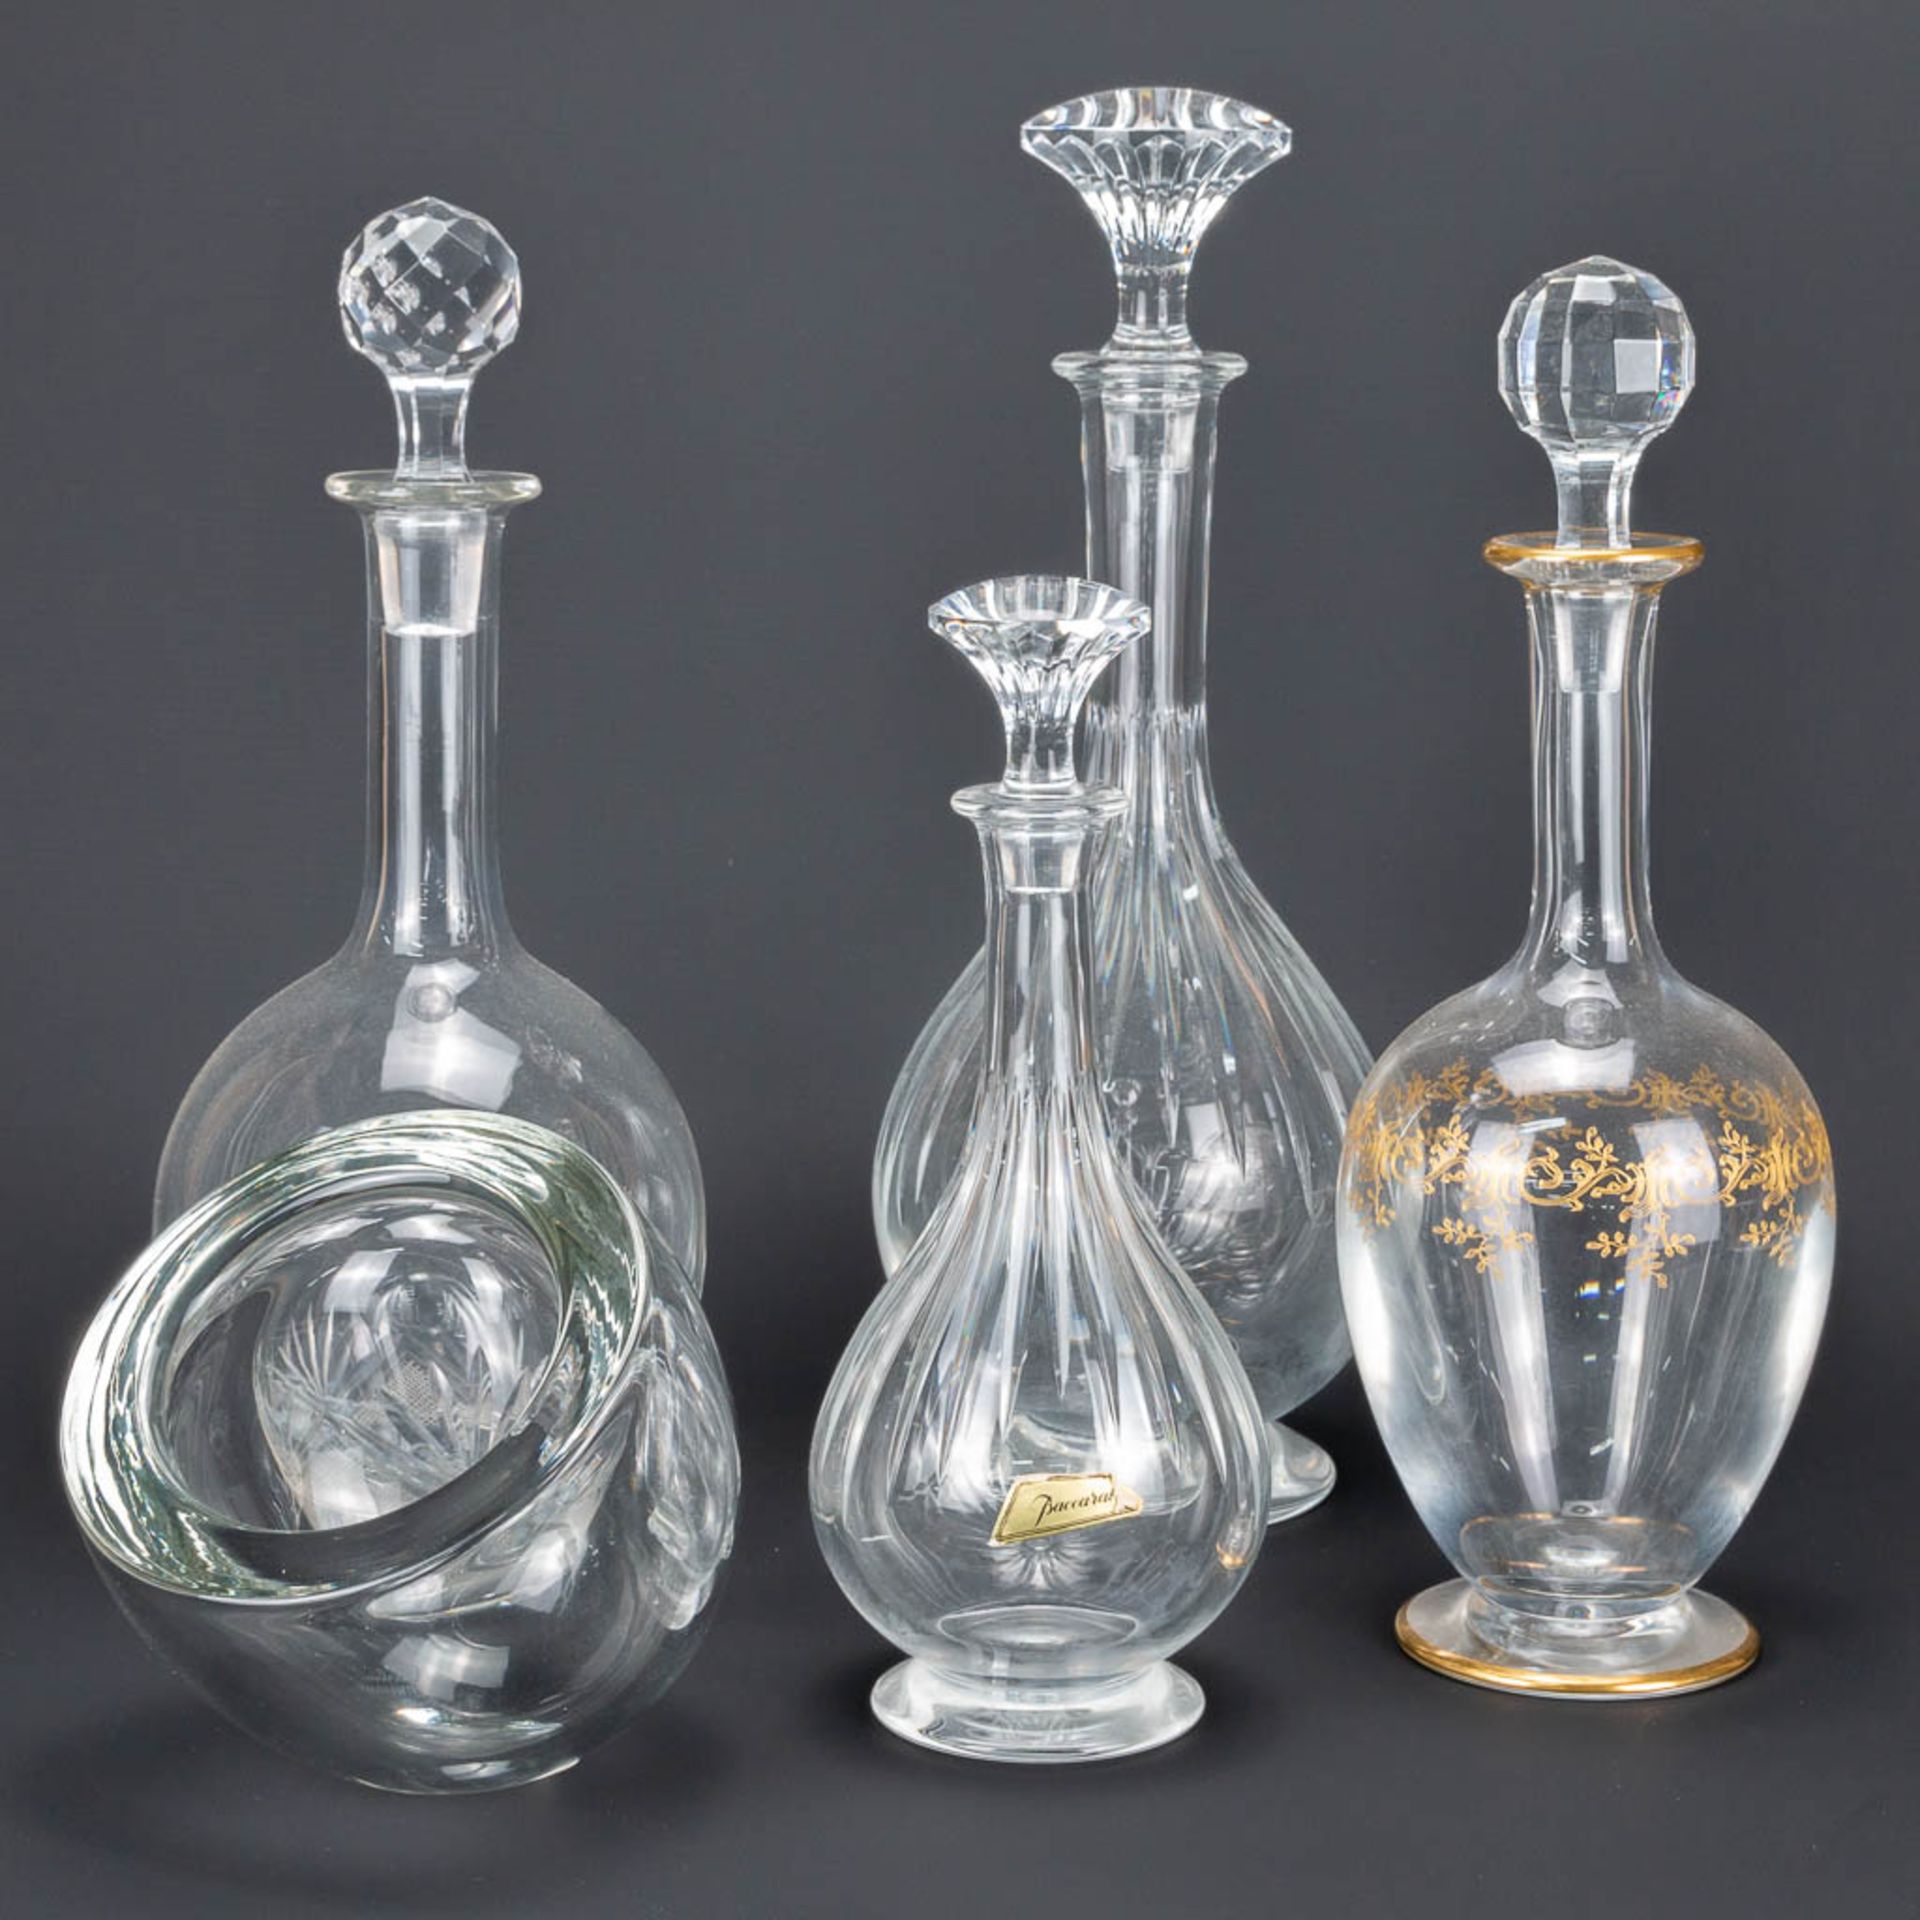 An assembled collection of 3 Baccarat decanters, a glass decanter and a Barbini Murano glass paperwe